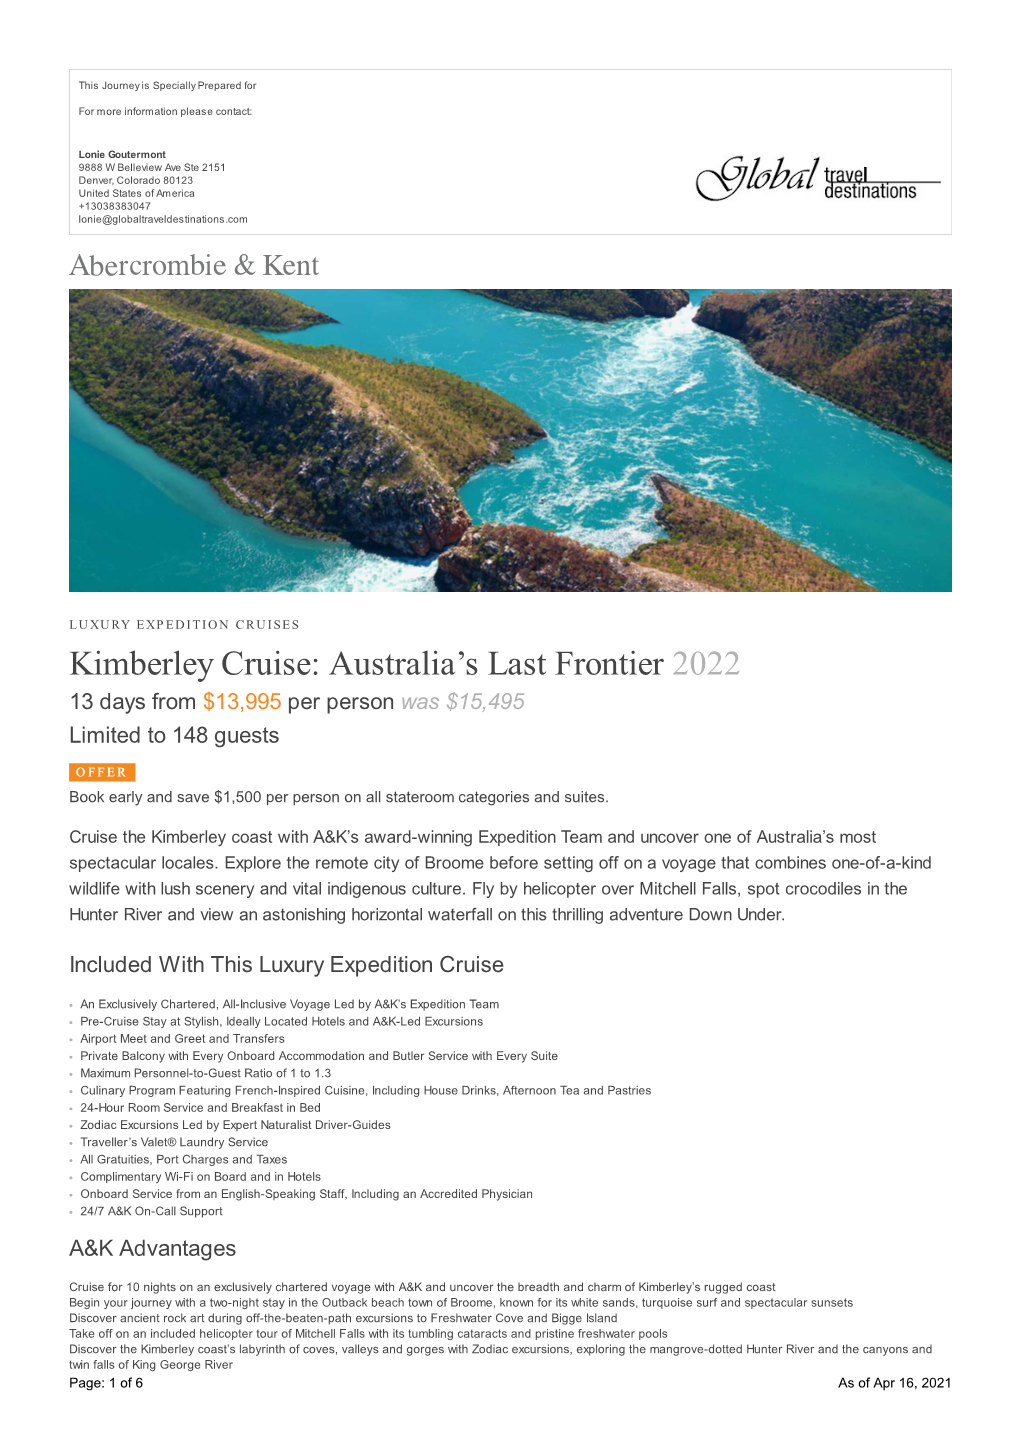 Kimberley Cruise: Australia’S Last Frontier 2022 13 Days from $13,995 Per Person Was $15,495 Limited to 148 Guests